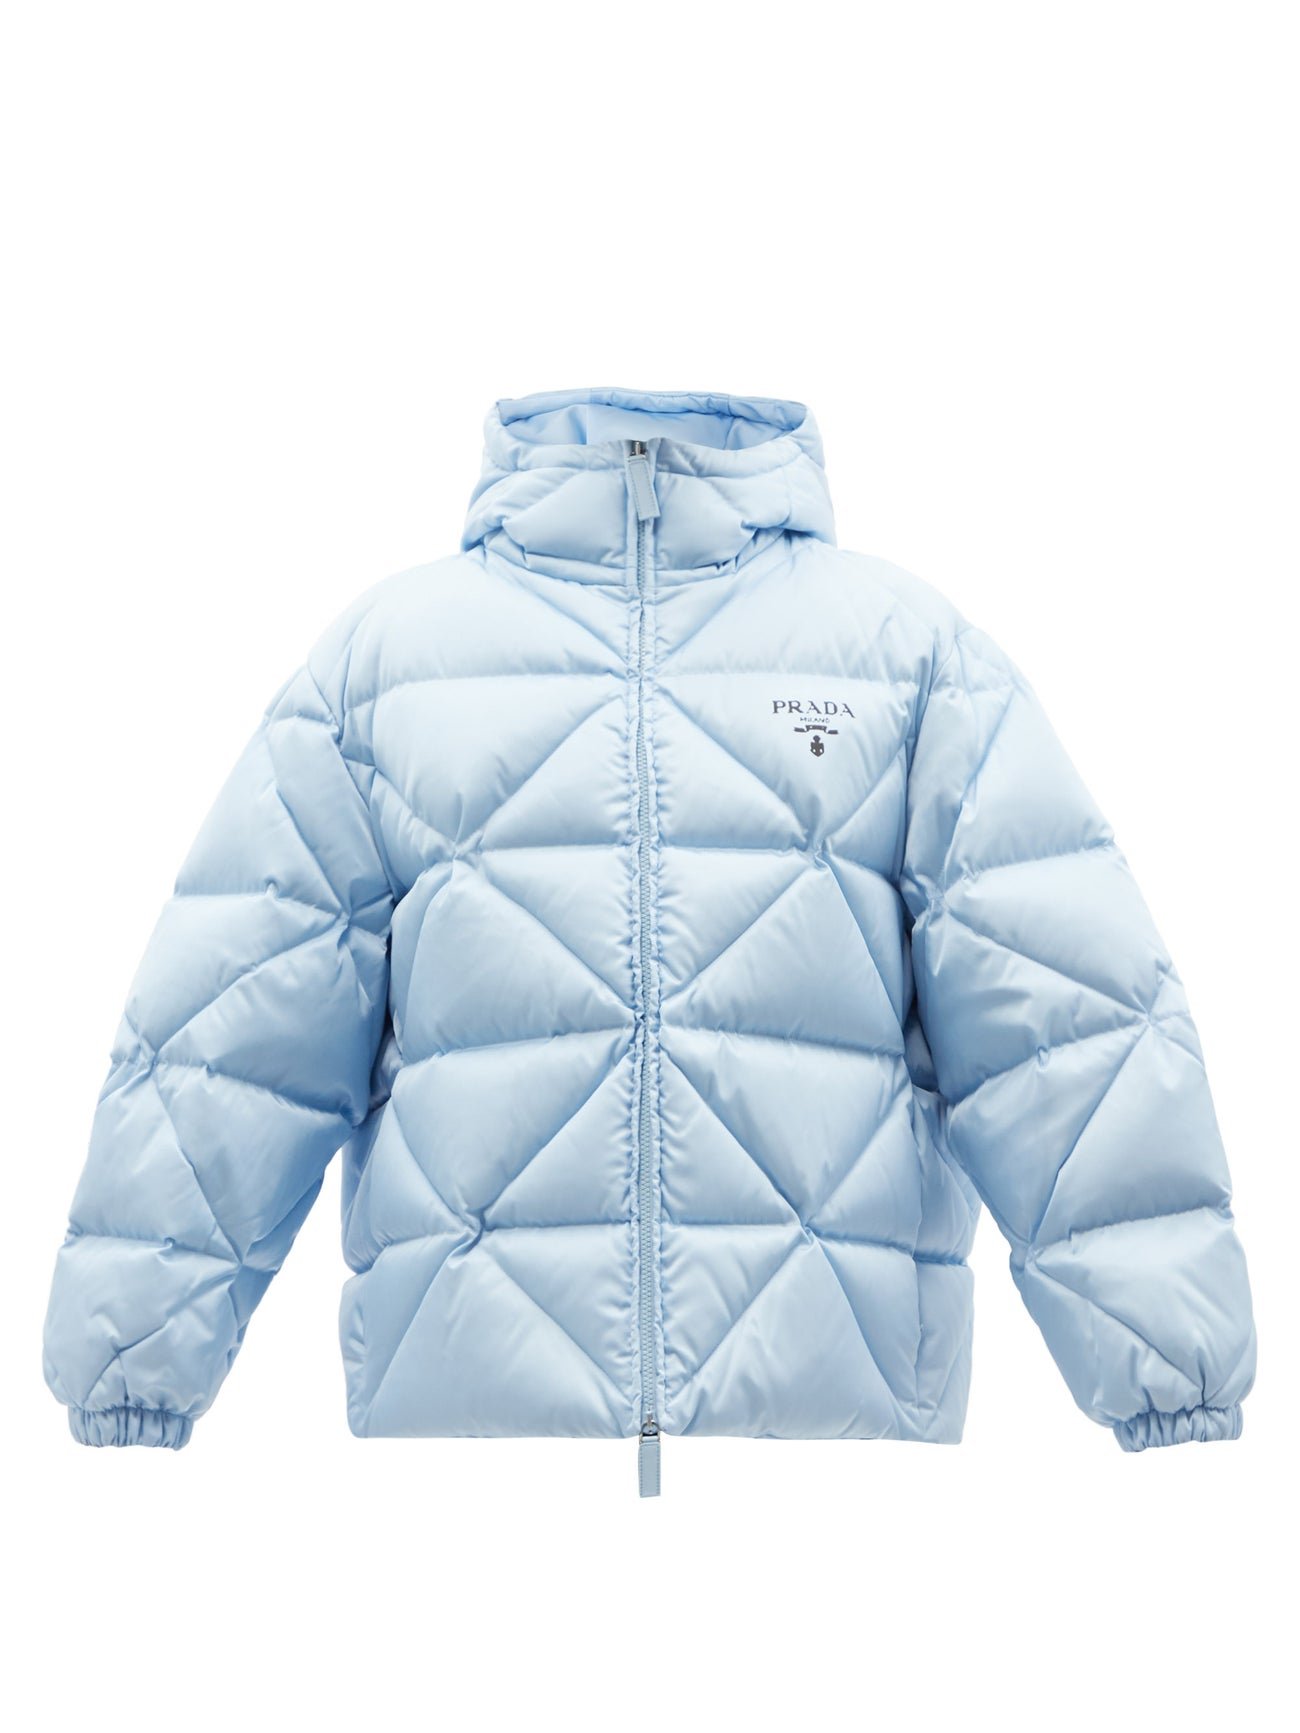 PRADA Hooded Quilted Down Re-Nylon Jacket in Blue